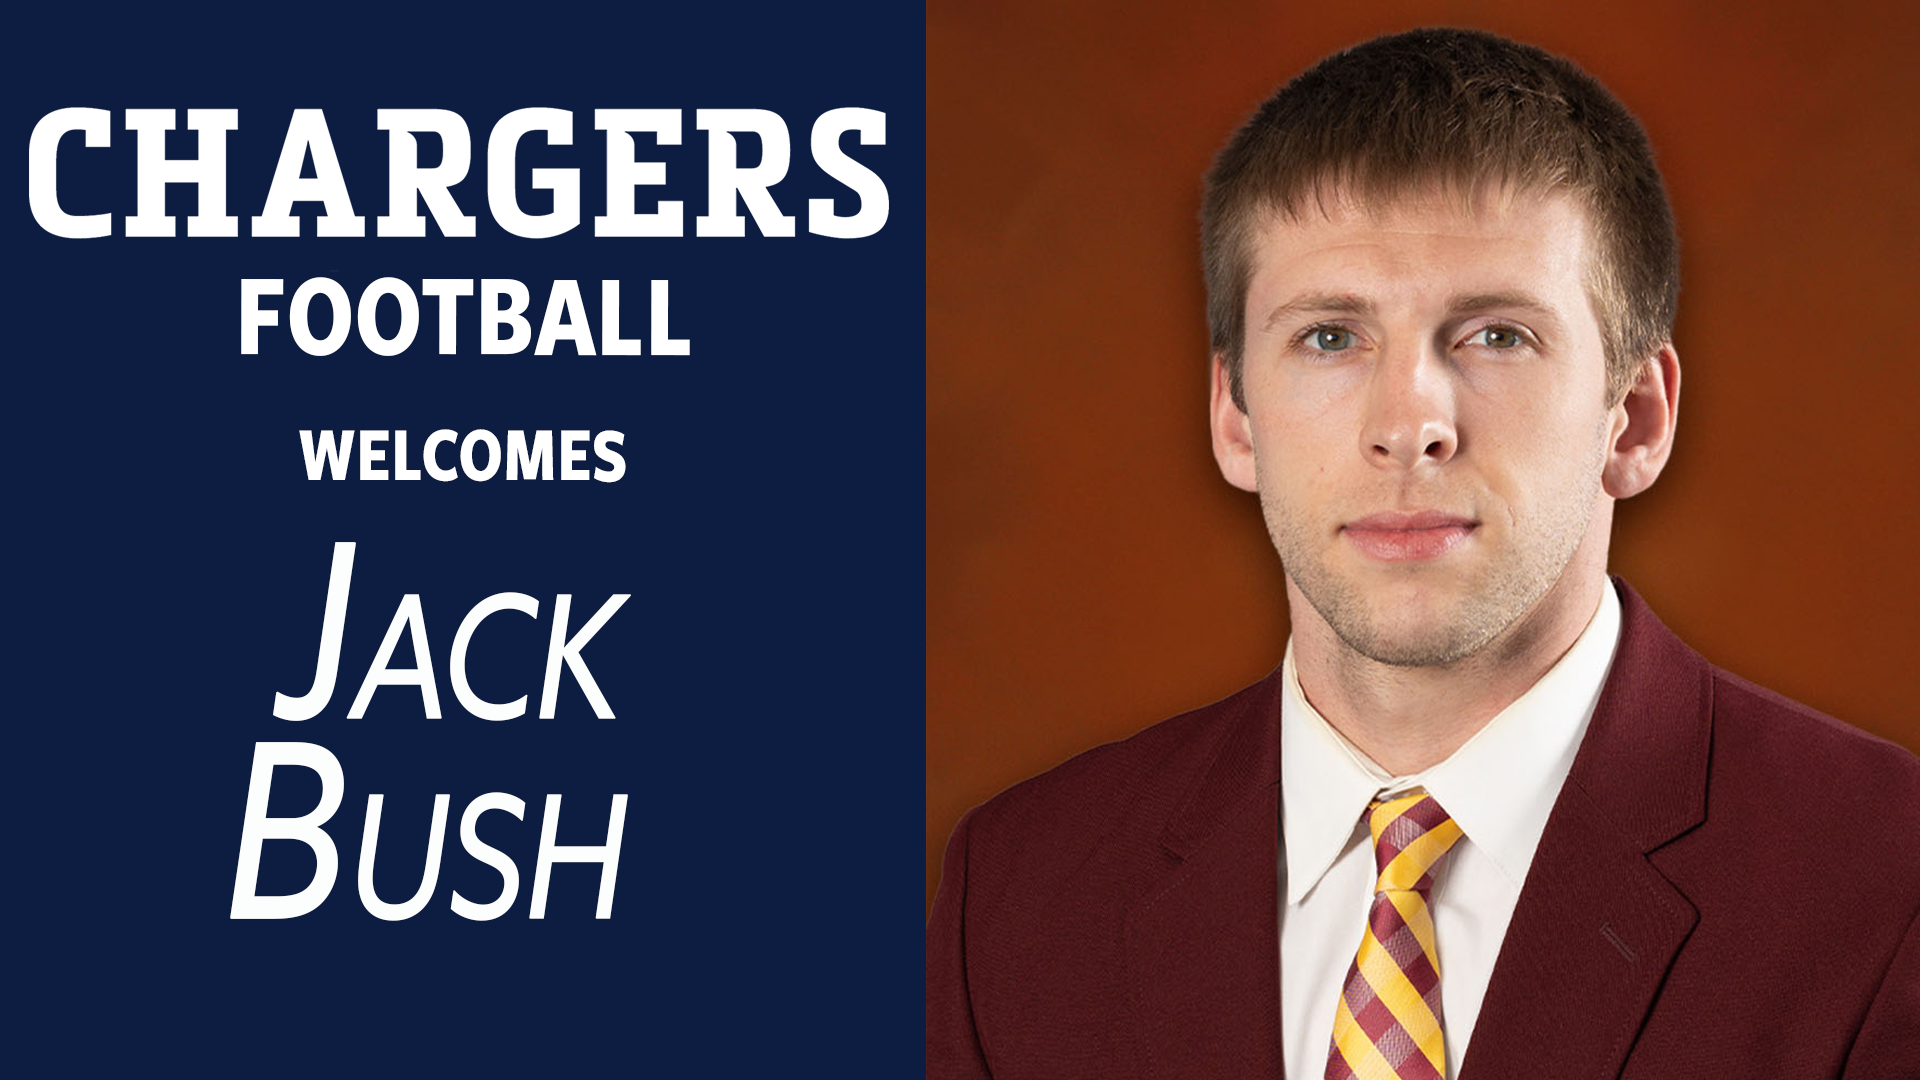 Jack Bush joins Chargers football coach staff as running backs coach